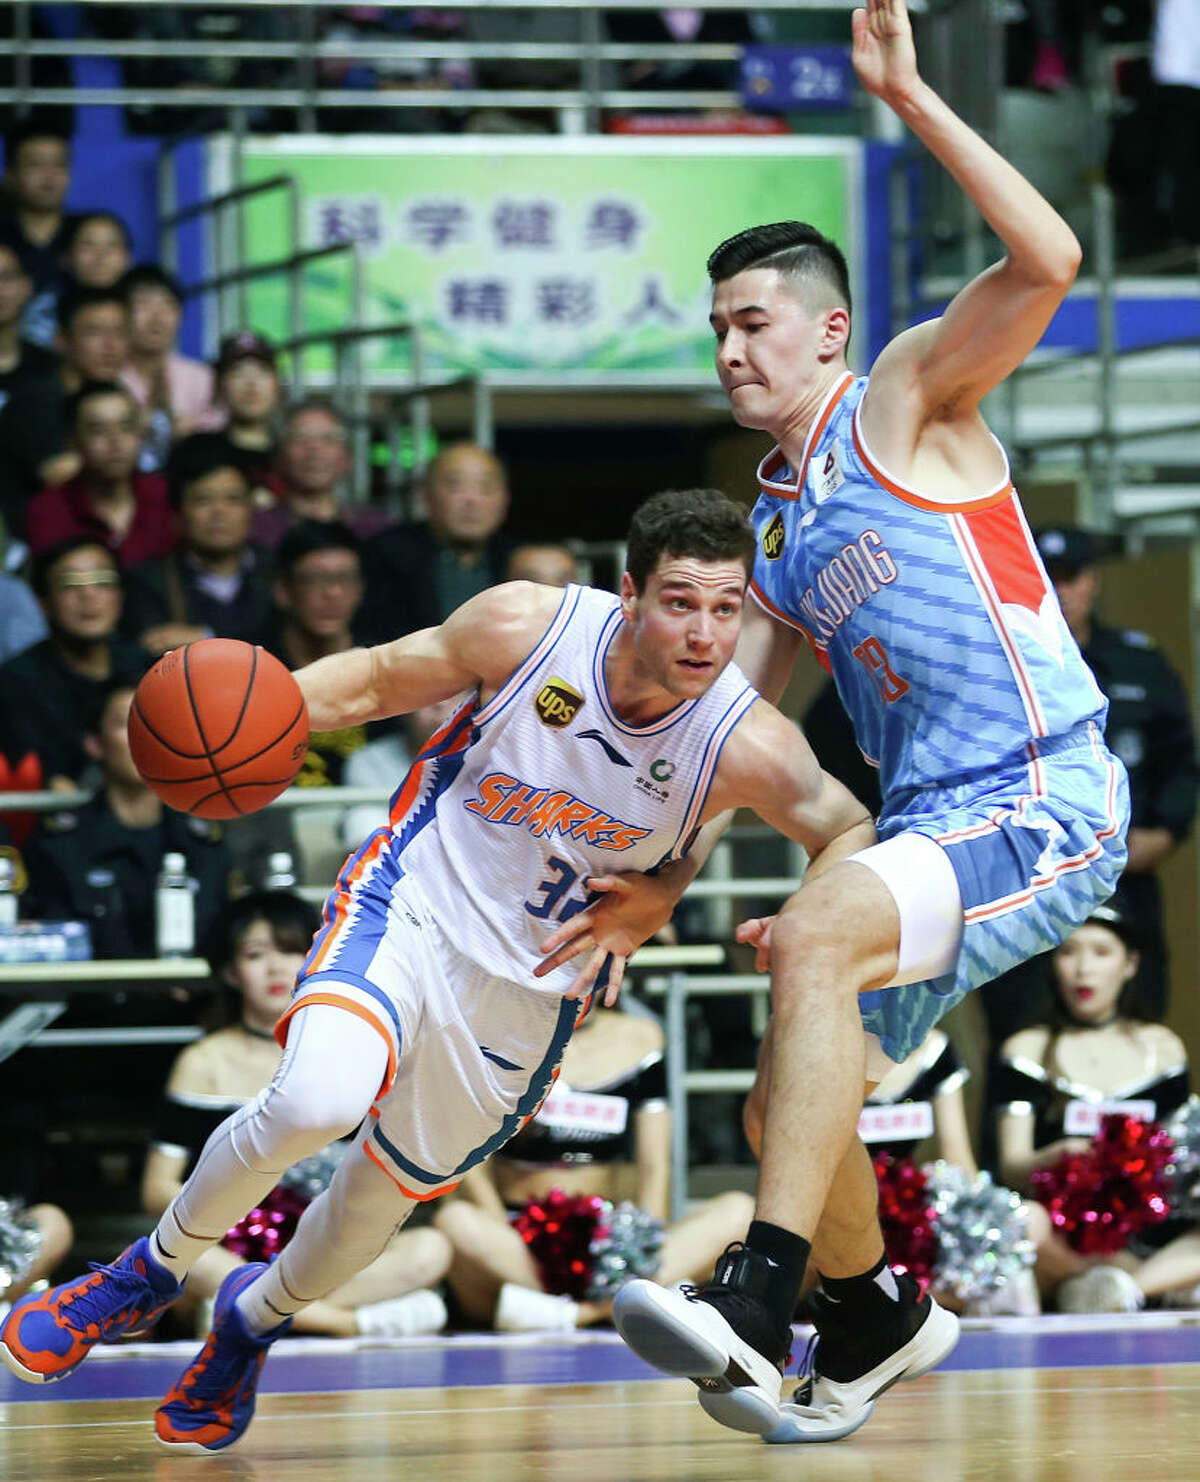 Jimmer Fredette of Shanghai Bilibili Sharks drives the ball during the 2018/2019 Chinese Basketball Association (CBA) League 13th round match between Shanghai Bilibili Sharks and Xinjiang Guanghui Flying Tigers at Pudong Yuanshen Gymnasium on November 18, 2018 in Shanghai, China.